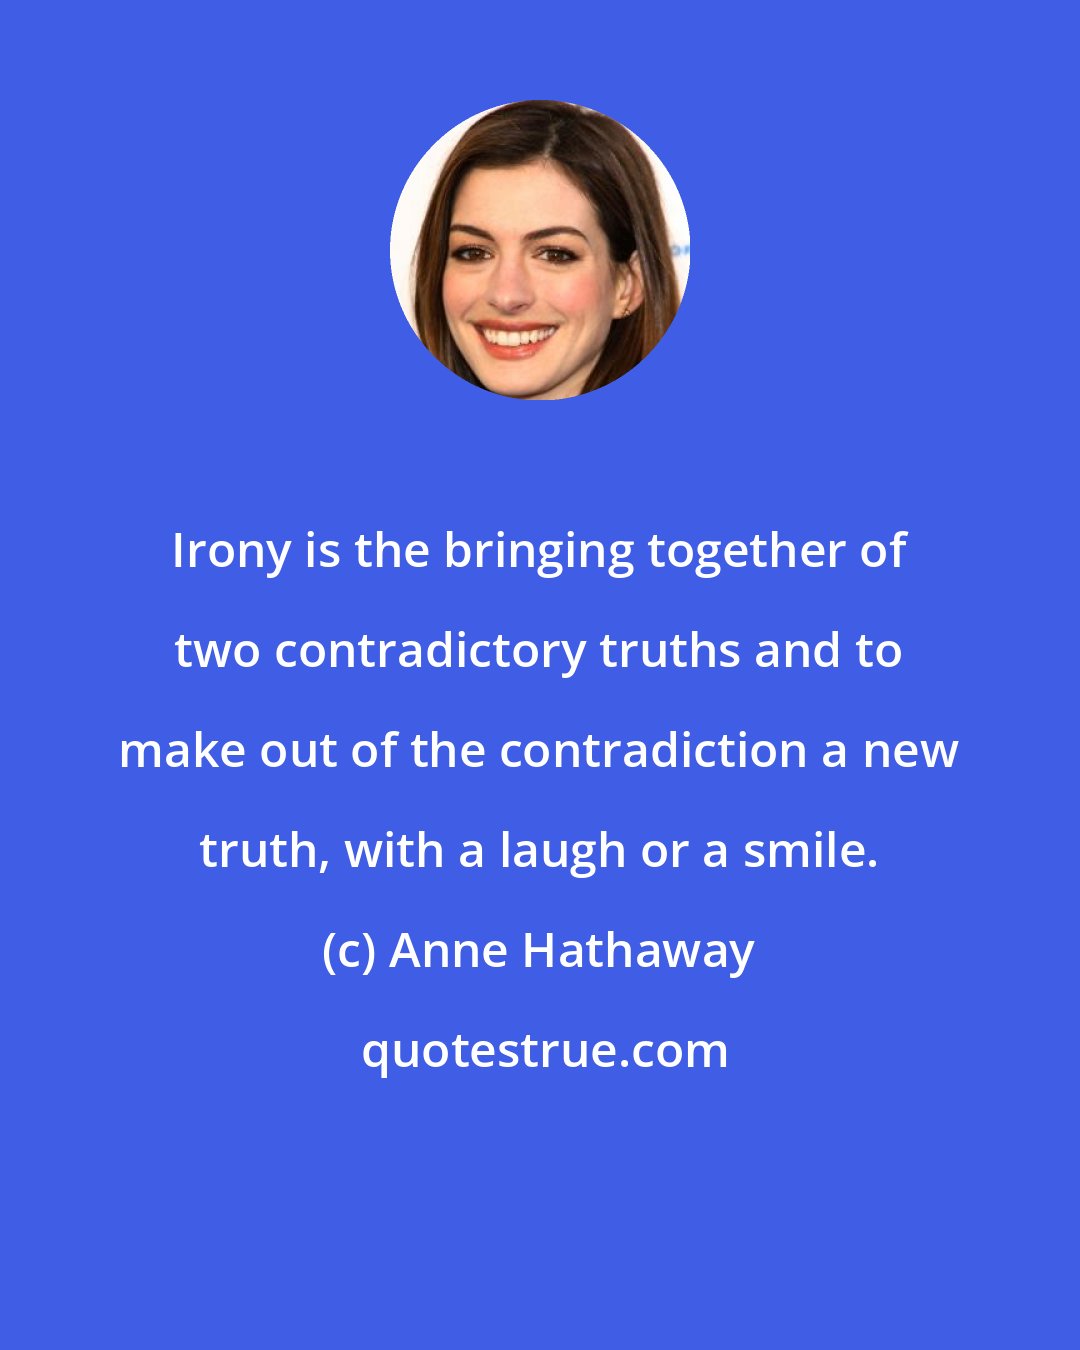 Anne Hathaway: Irony is the bringing together of two contradictory truths and to make out of the contradiction a new truth, with a laugh or a smile.